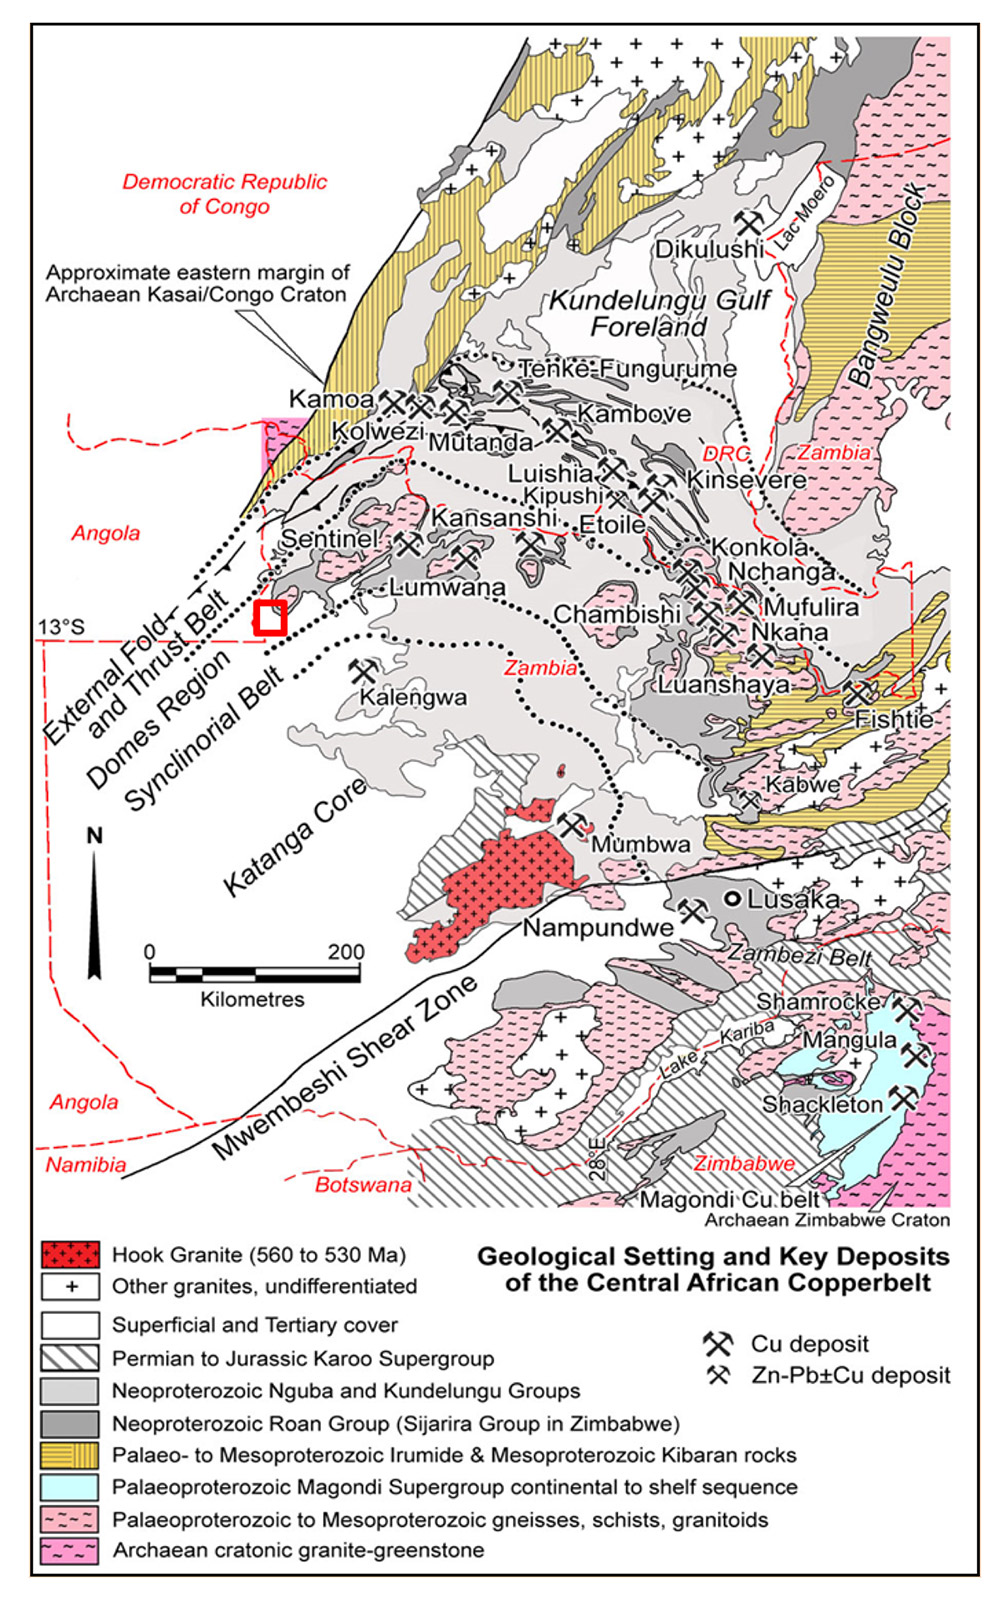 Regional geological setting of the Central African Copperbelt